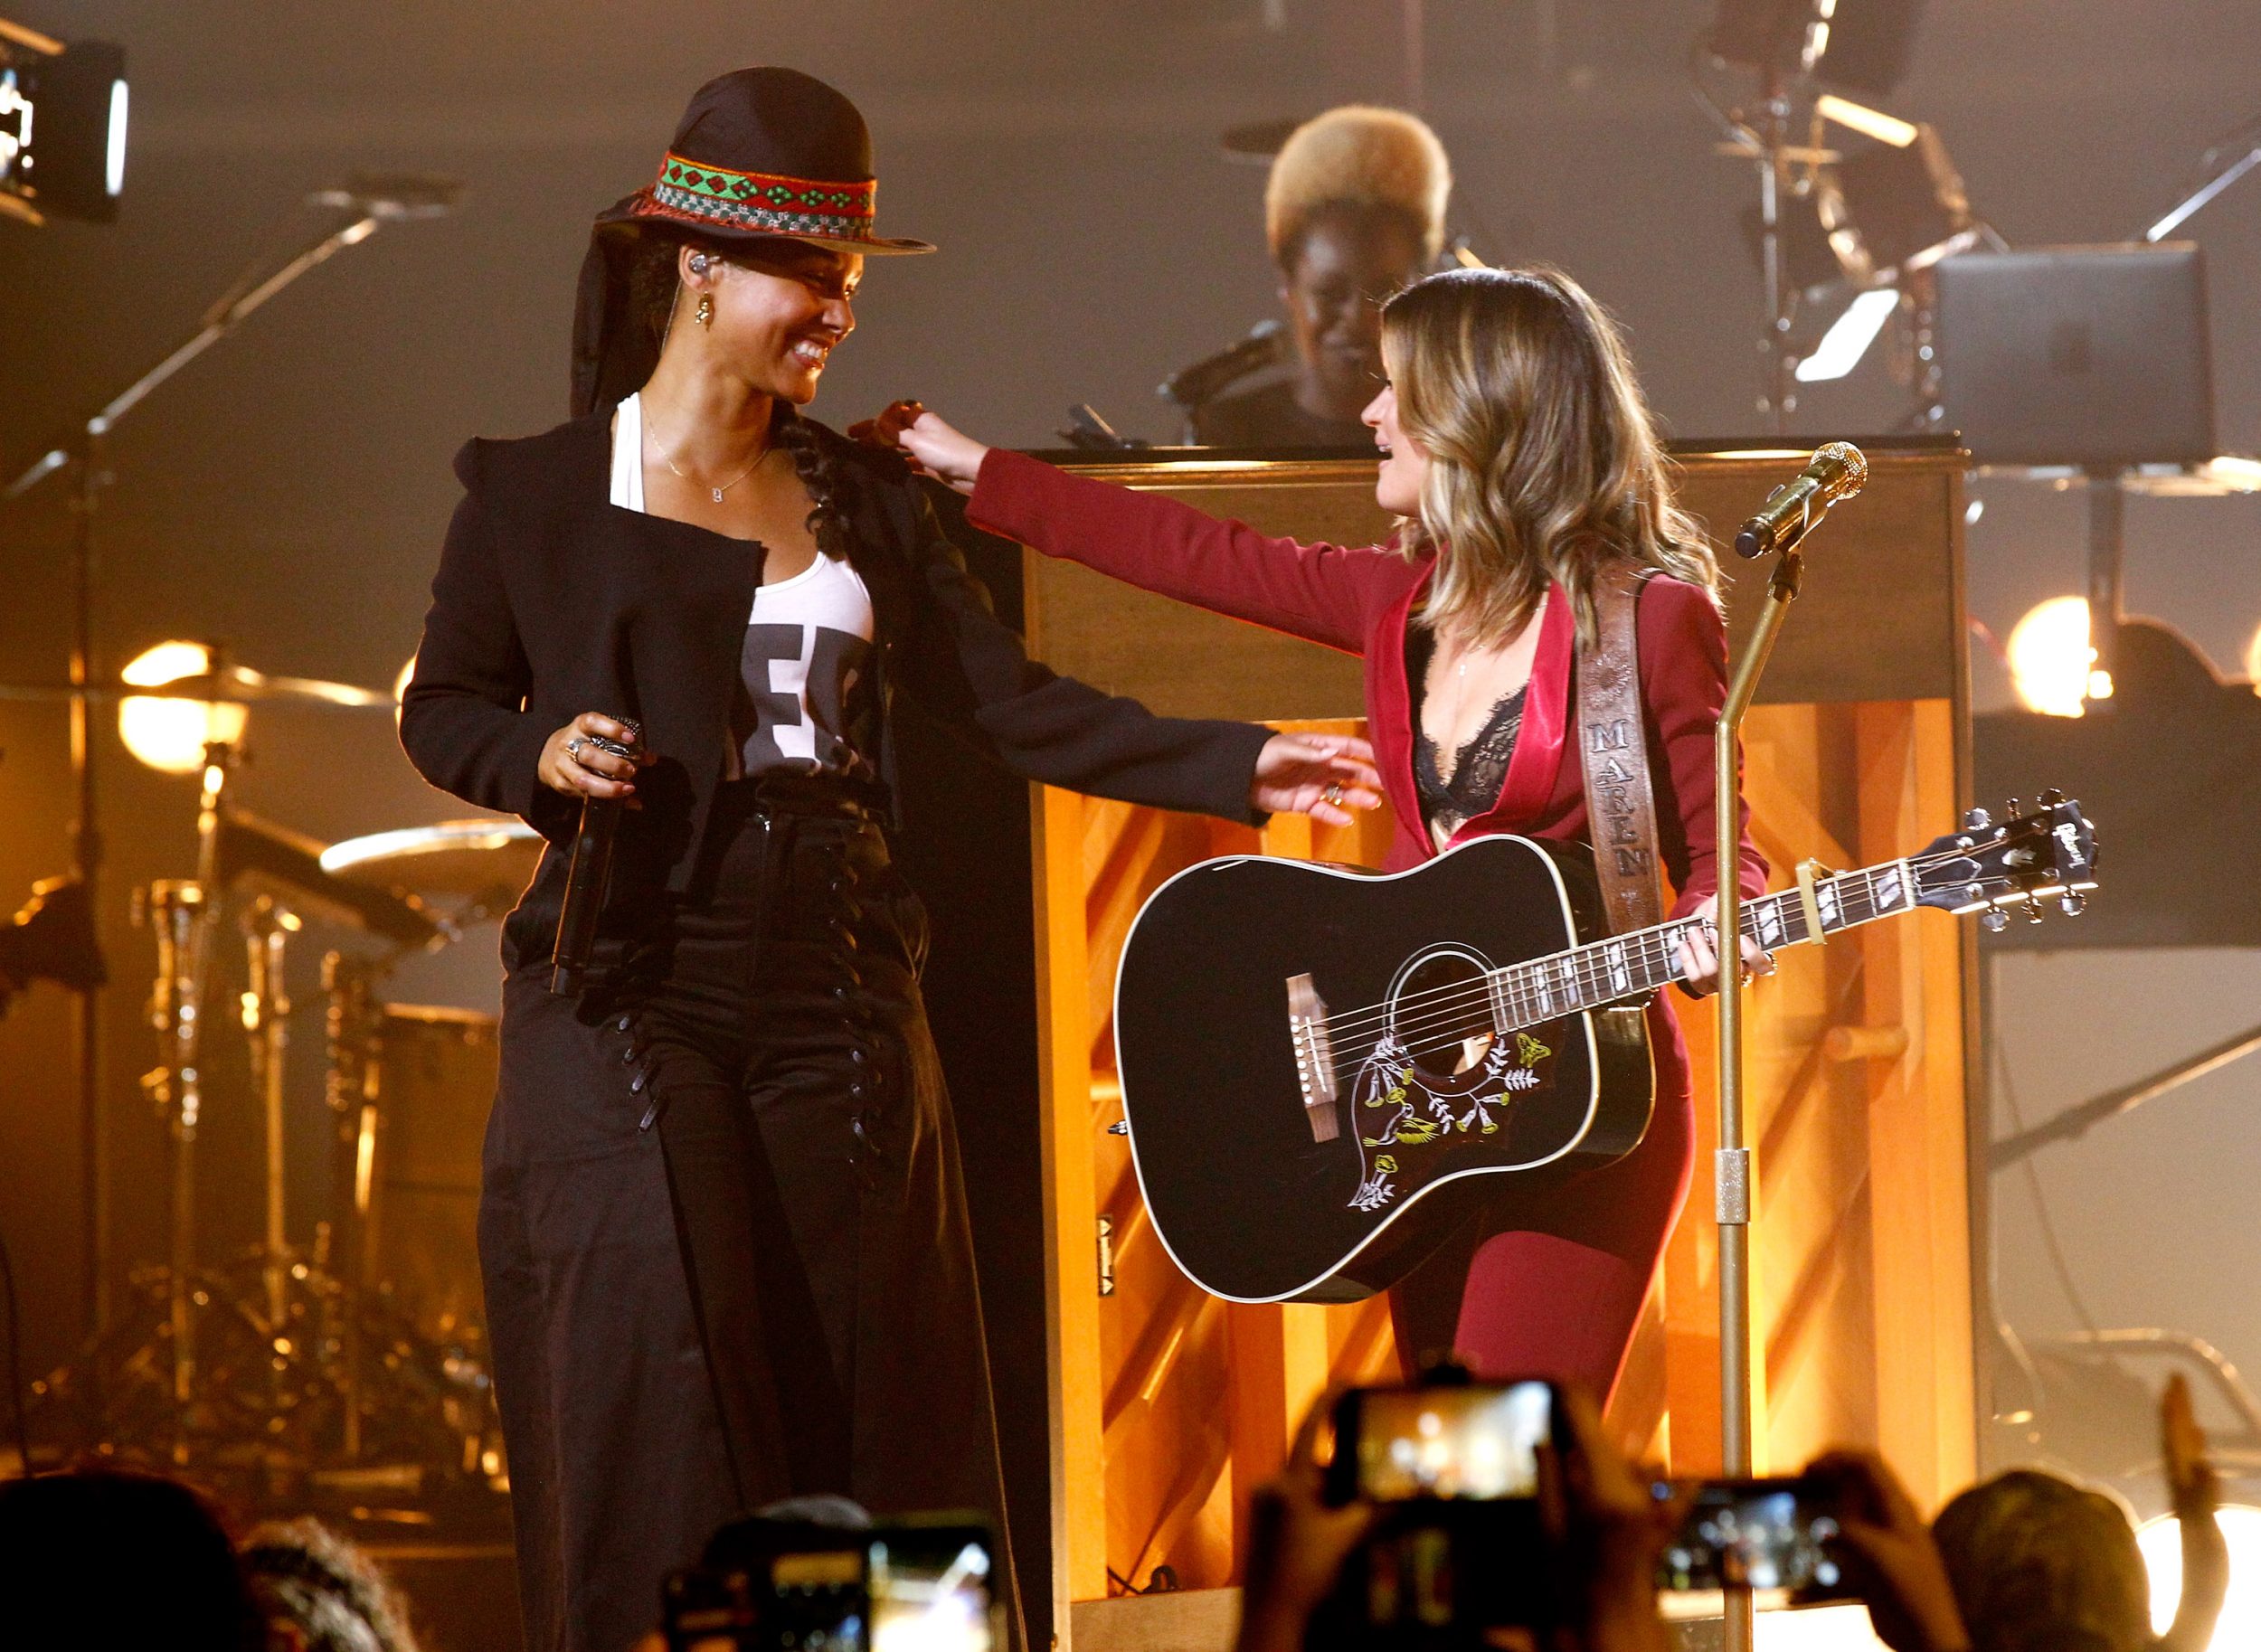 FRANKLIN, TN - AUGUST 31:  Singer-songwriters Alicia Keys (L) and Maren Morris perform onstage during CMT Crossroads: Alicia Keys and Maren Morris on August 31, 2016 in Nashville, Tennessee.  (Photo by Terry Wyatt/Getty Images for CMT)